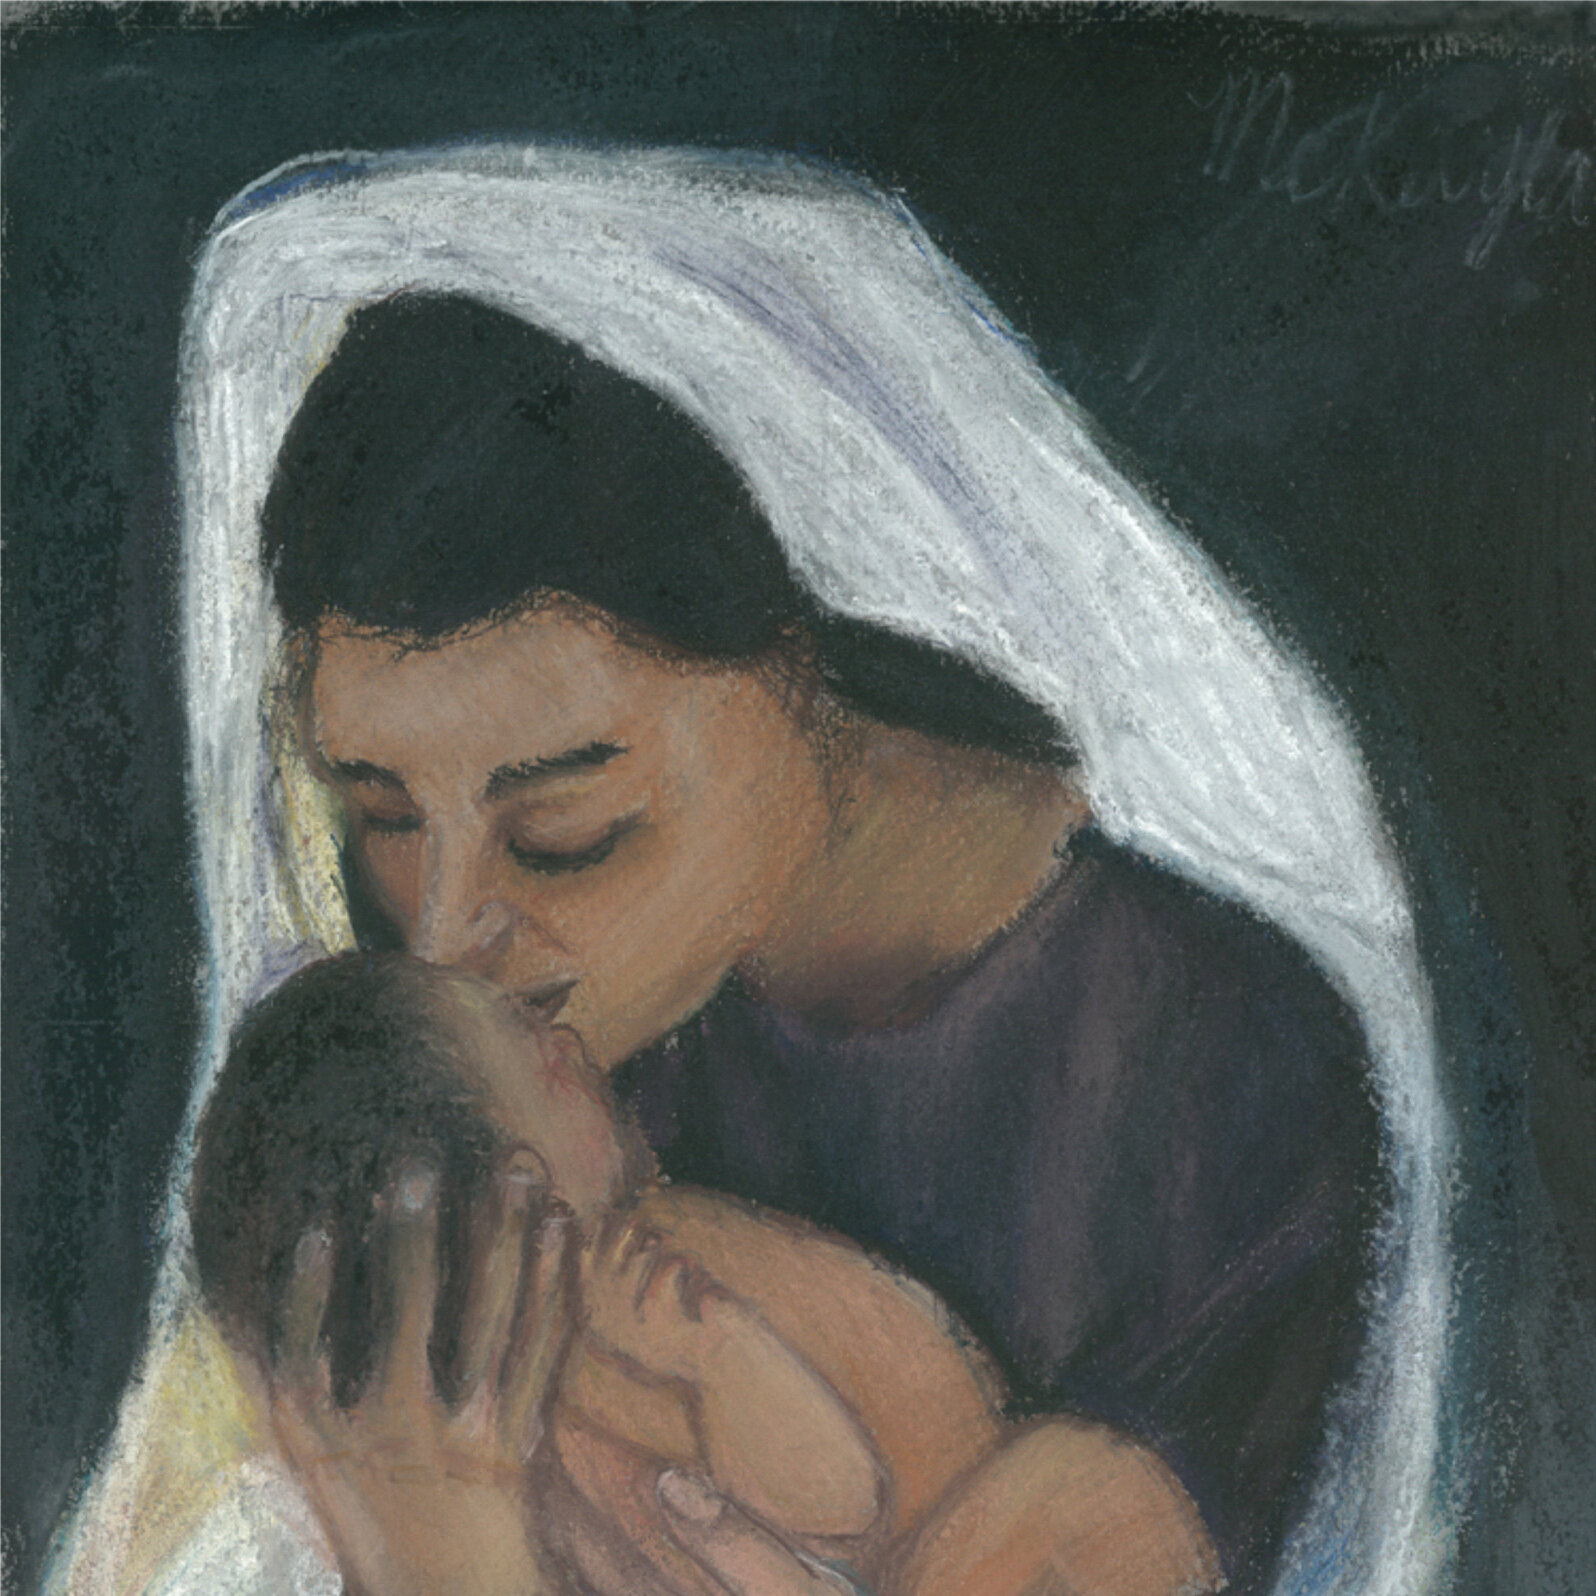 Illustration of Mary and Baby Jesus. By McKayla.